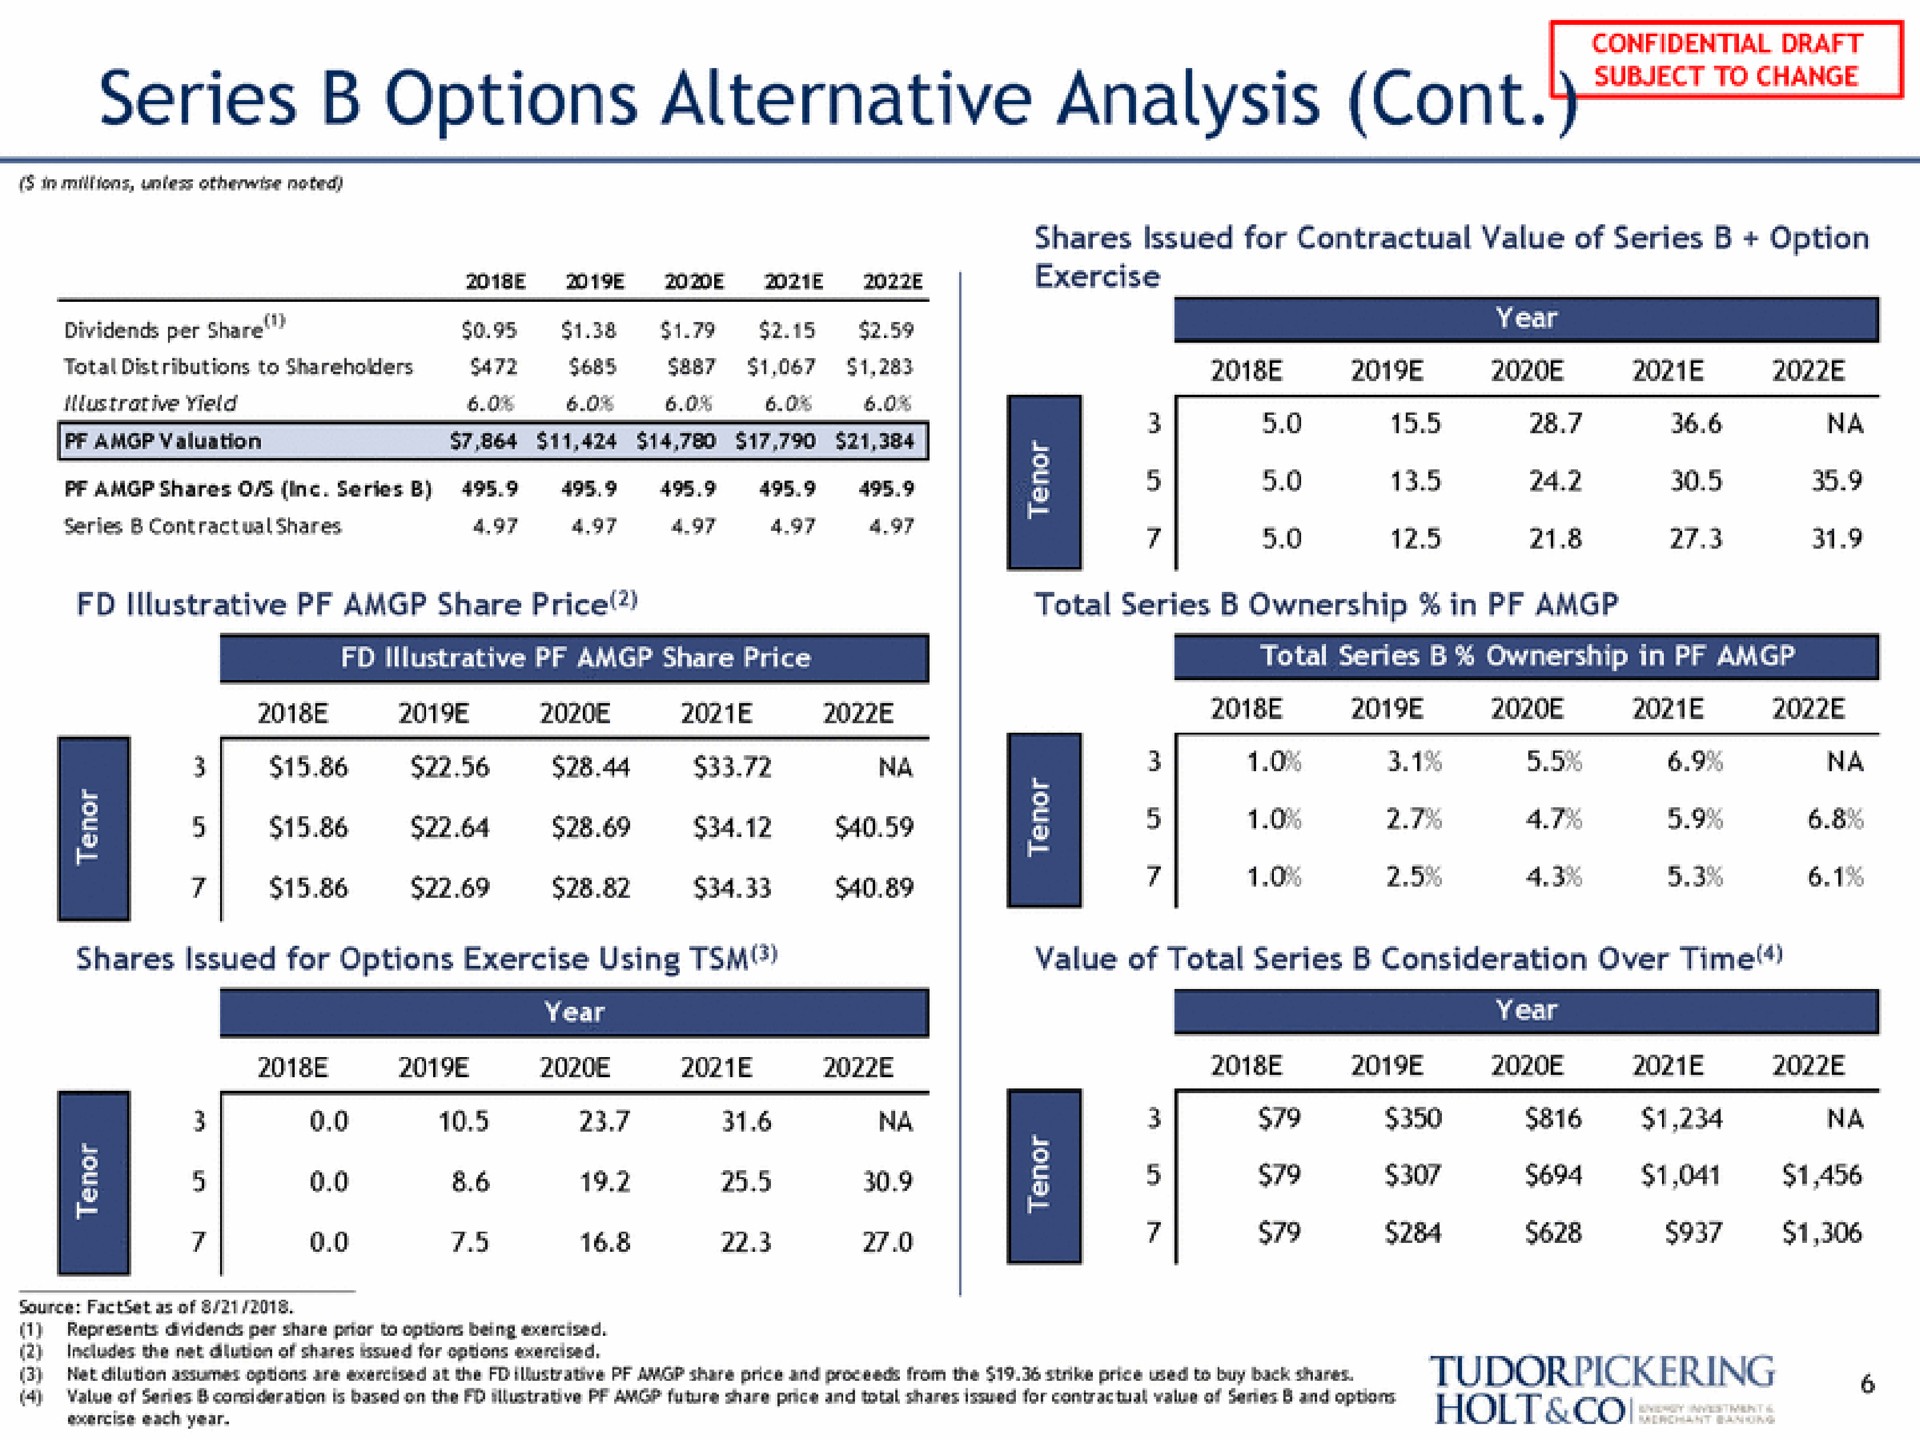 series options alternative analysis dividends per share me exercise | Tudor, Pickering, Holt & Co